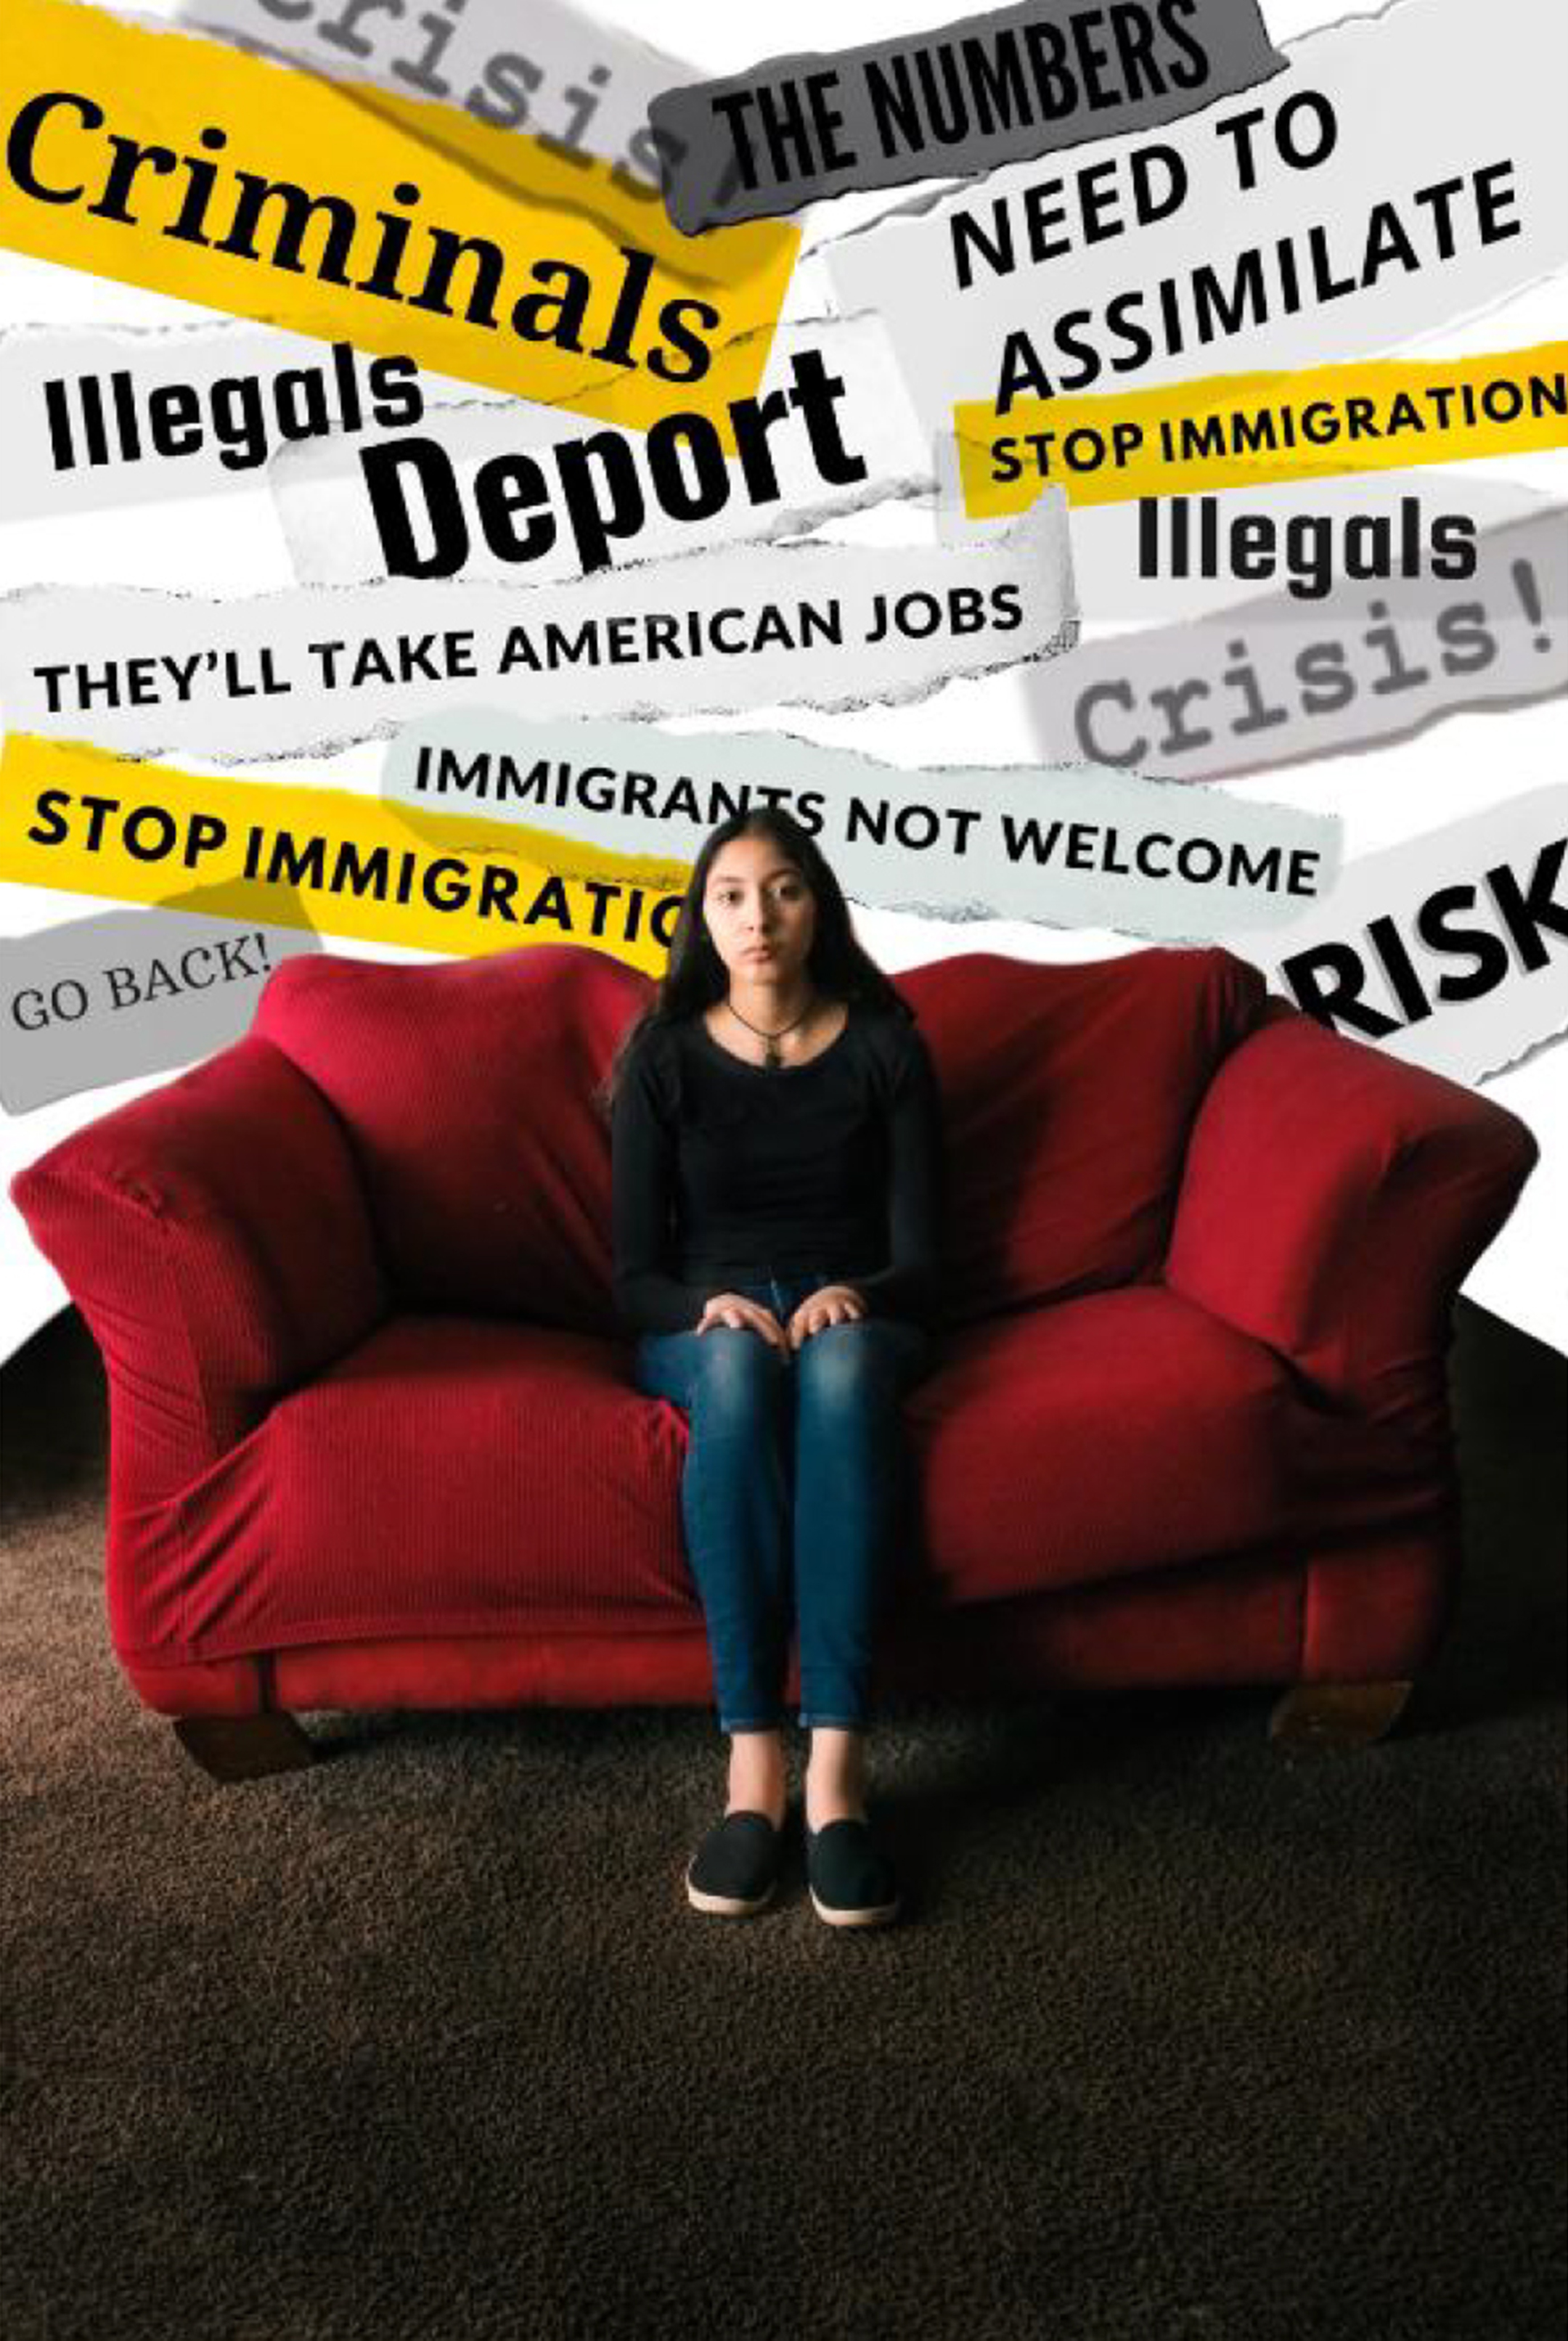 Photo collage of a young woman sitting on a red couch with words like criminals, deport, illegal, and need to assimilate rendered as overlapping headlines above her